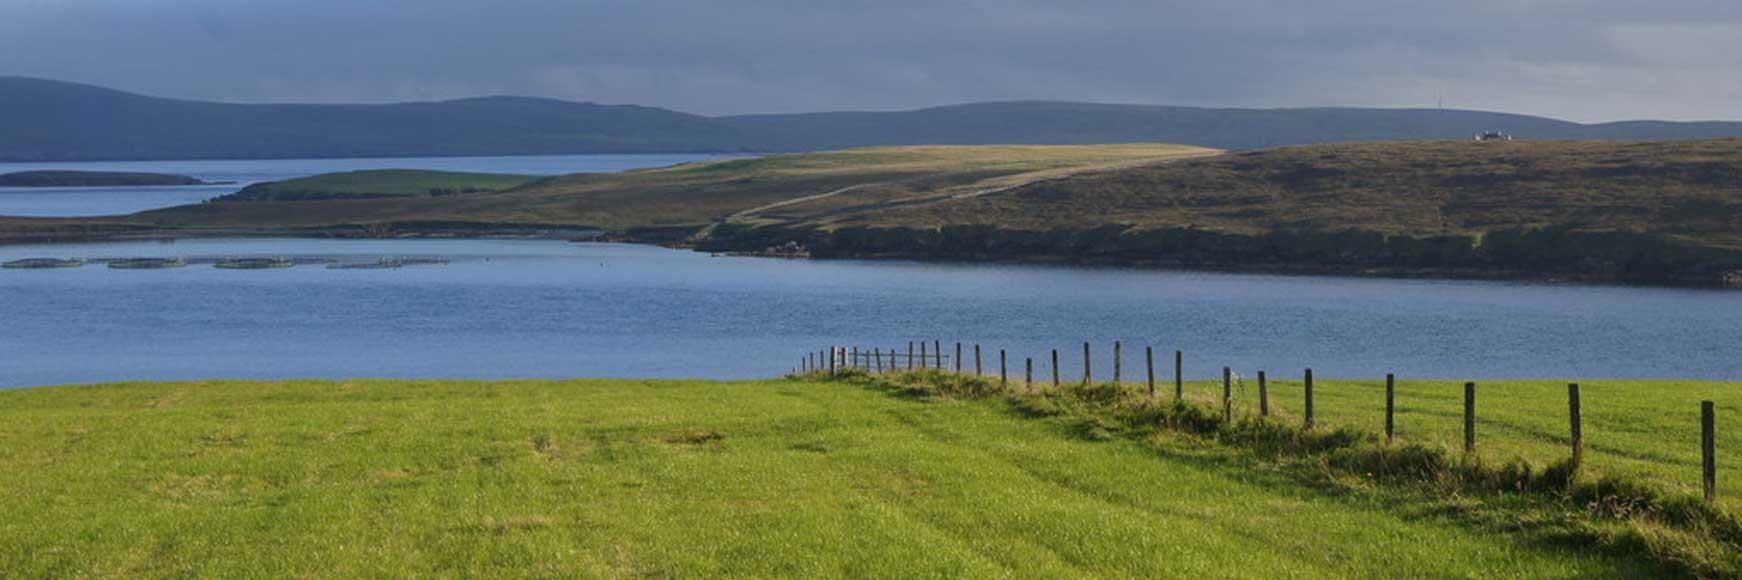 Top 5 Coastal and lochside views in Scotland banner image